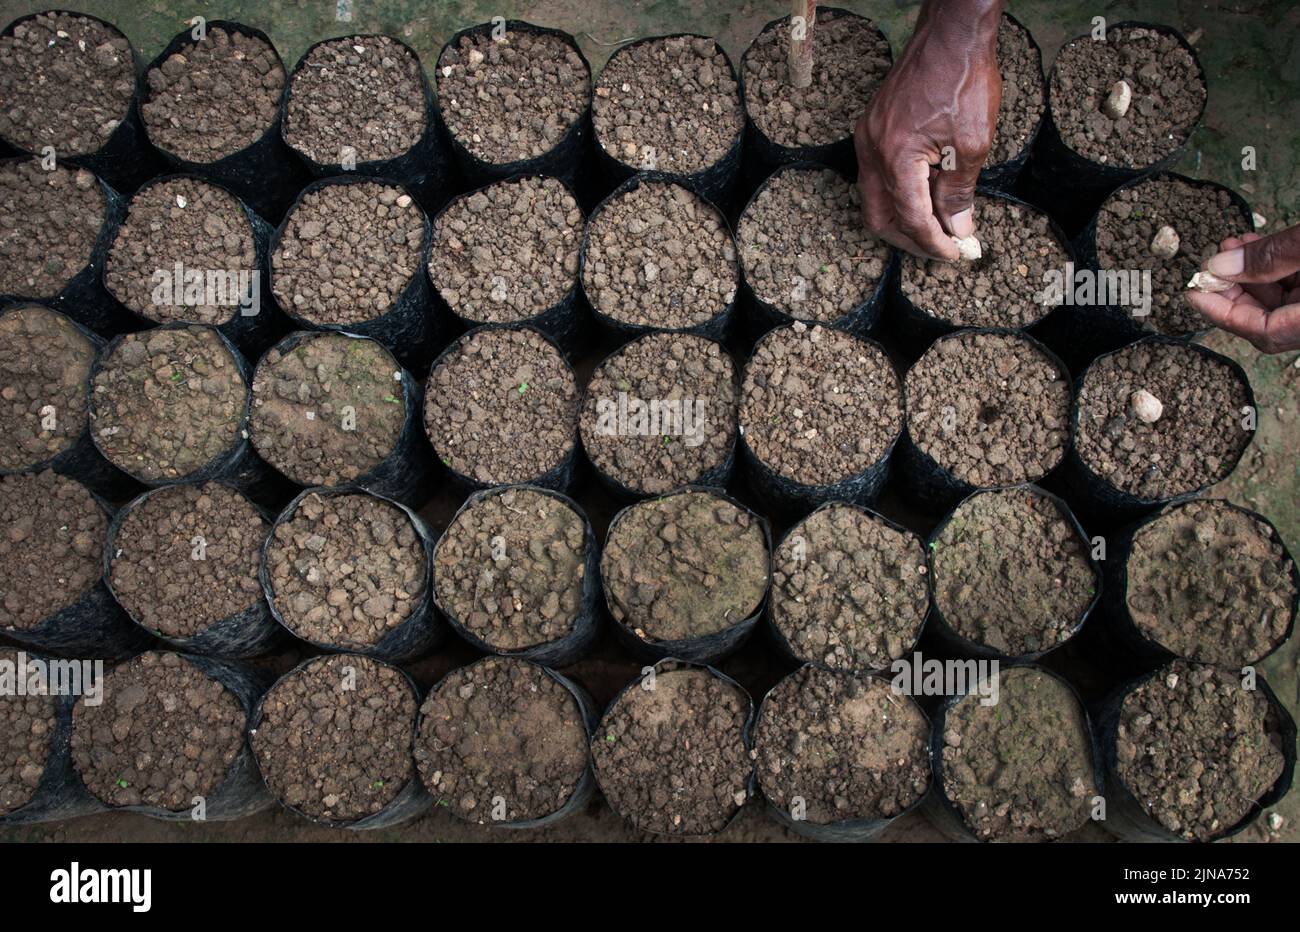 Overhead view of a farmer planting cocoa beans in plant pots, Indonesia Stock Photo